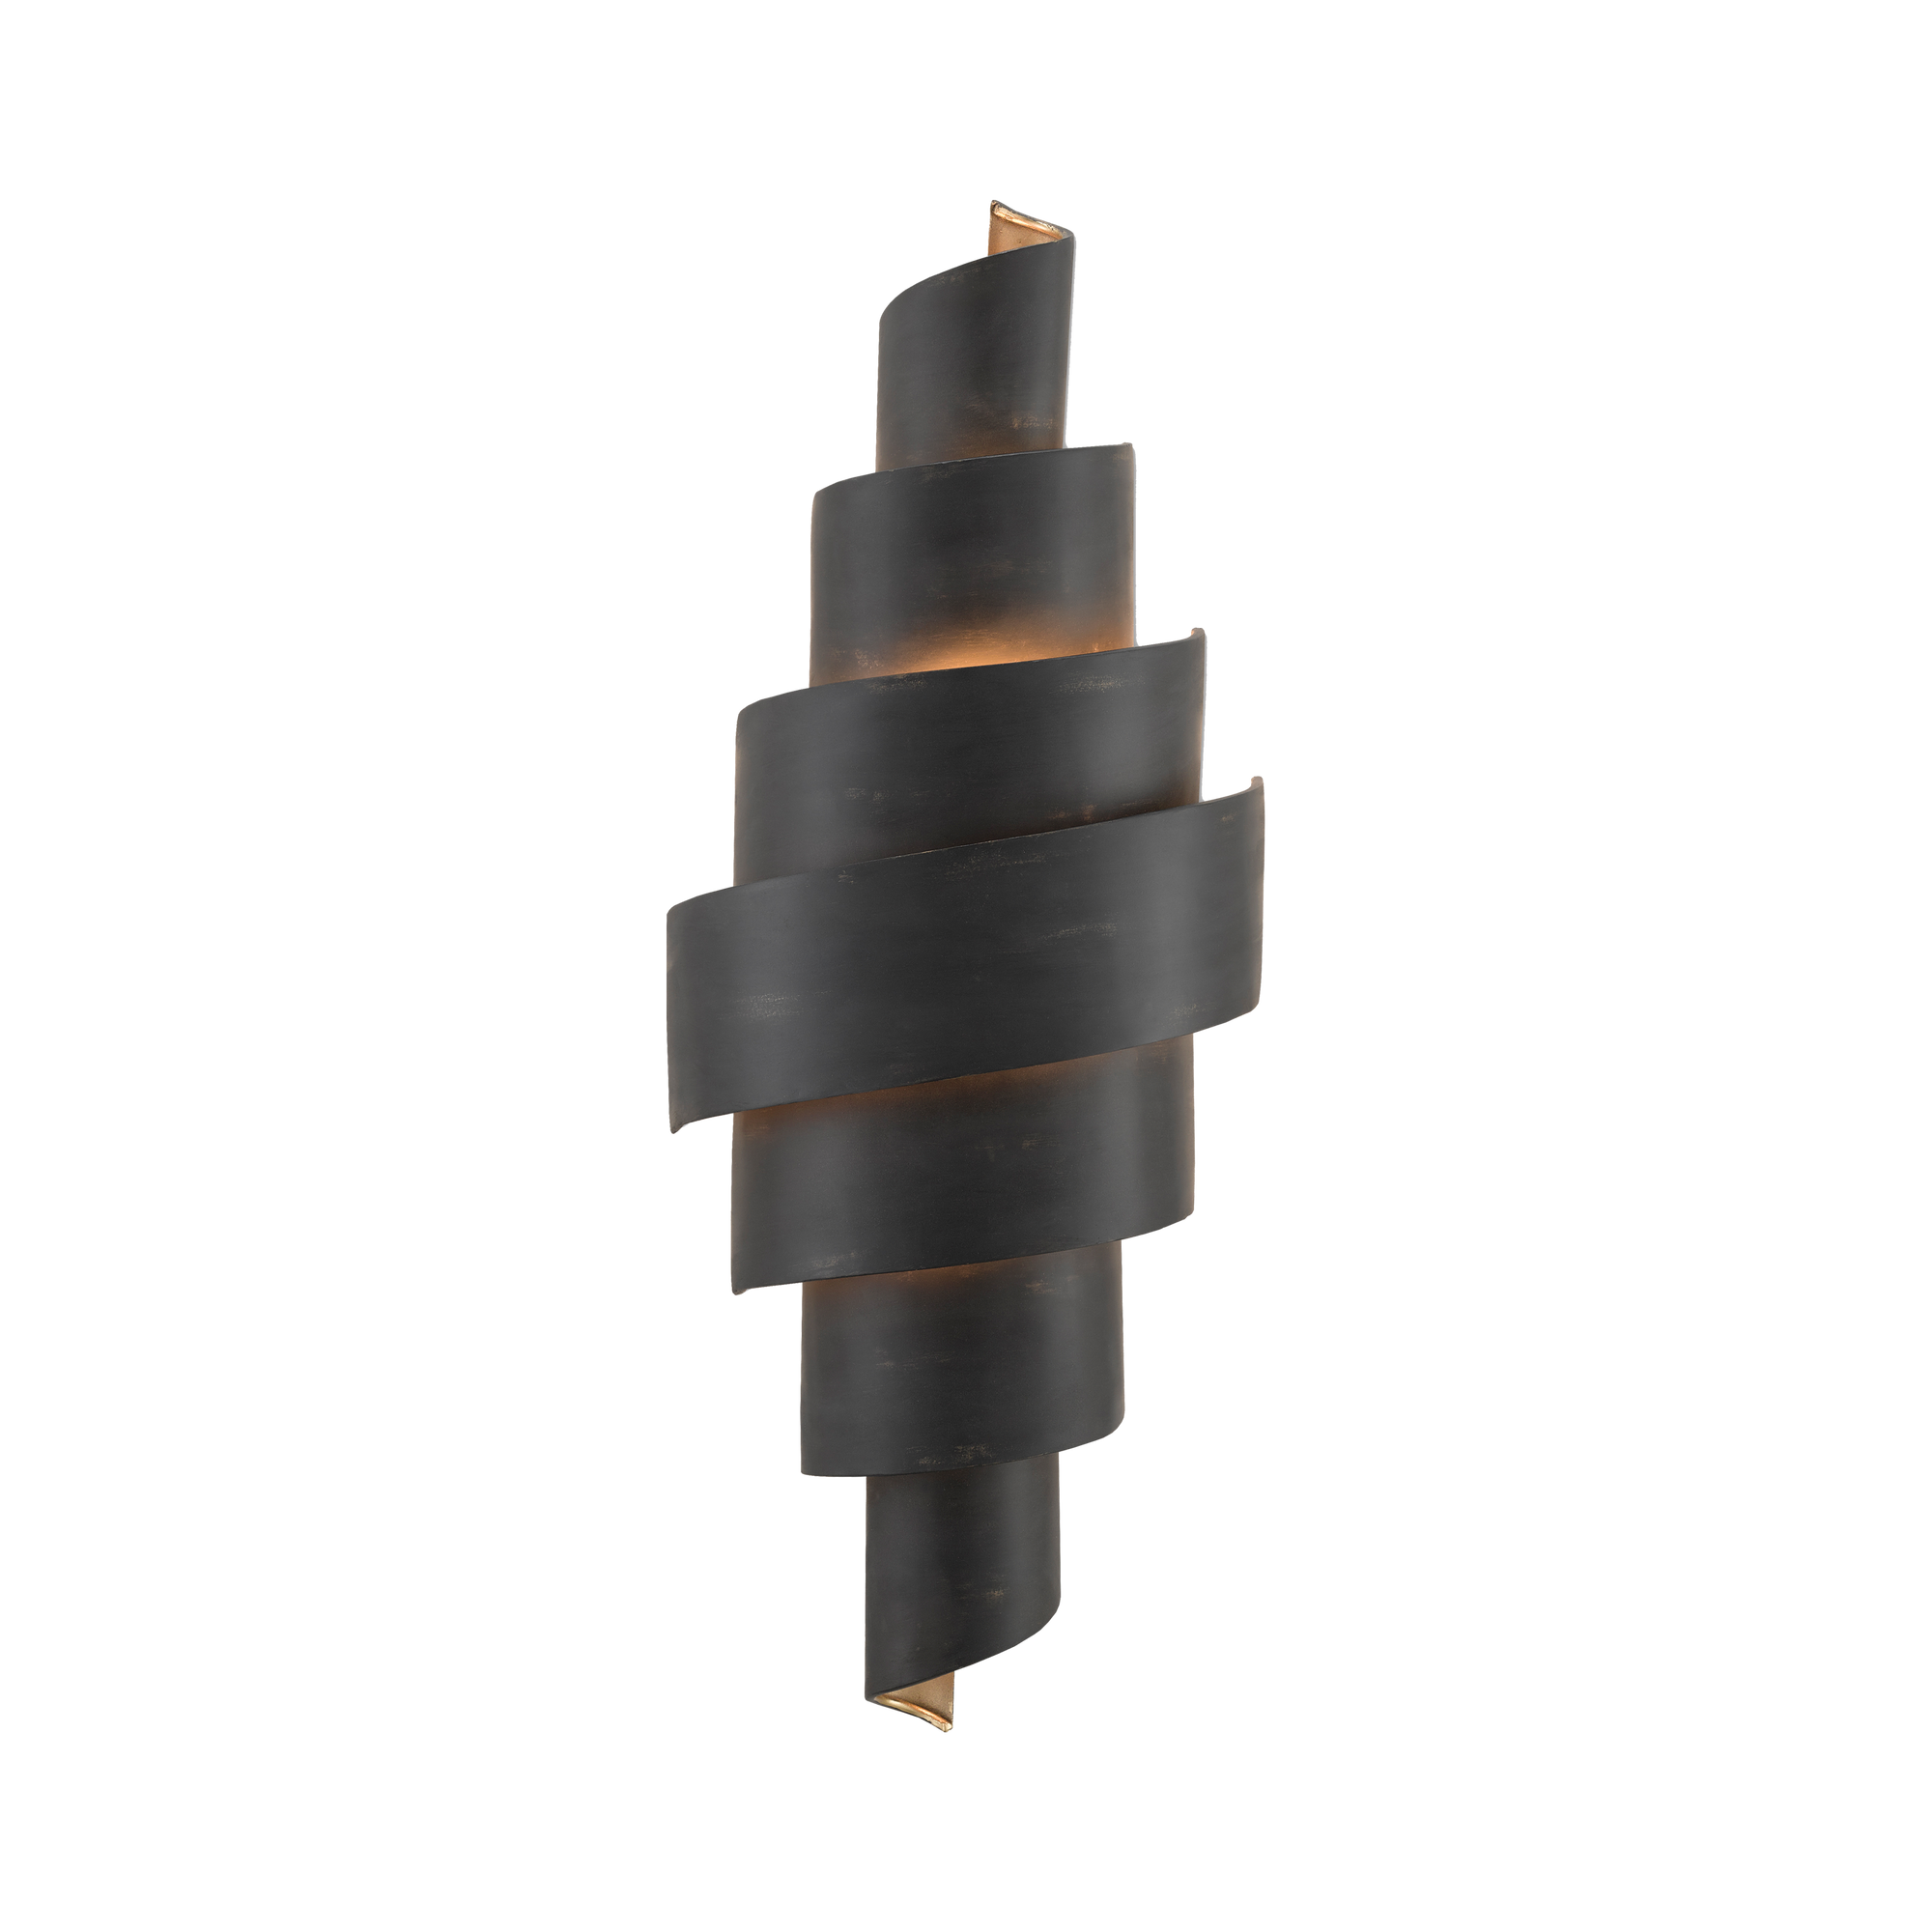 The Trompe Spiral Wall Light has an elegant fluidity to its lines that curl downward to end with a lovely swirl.